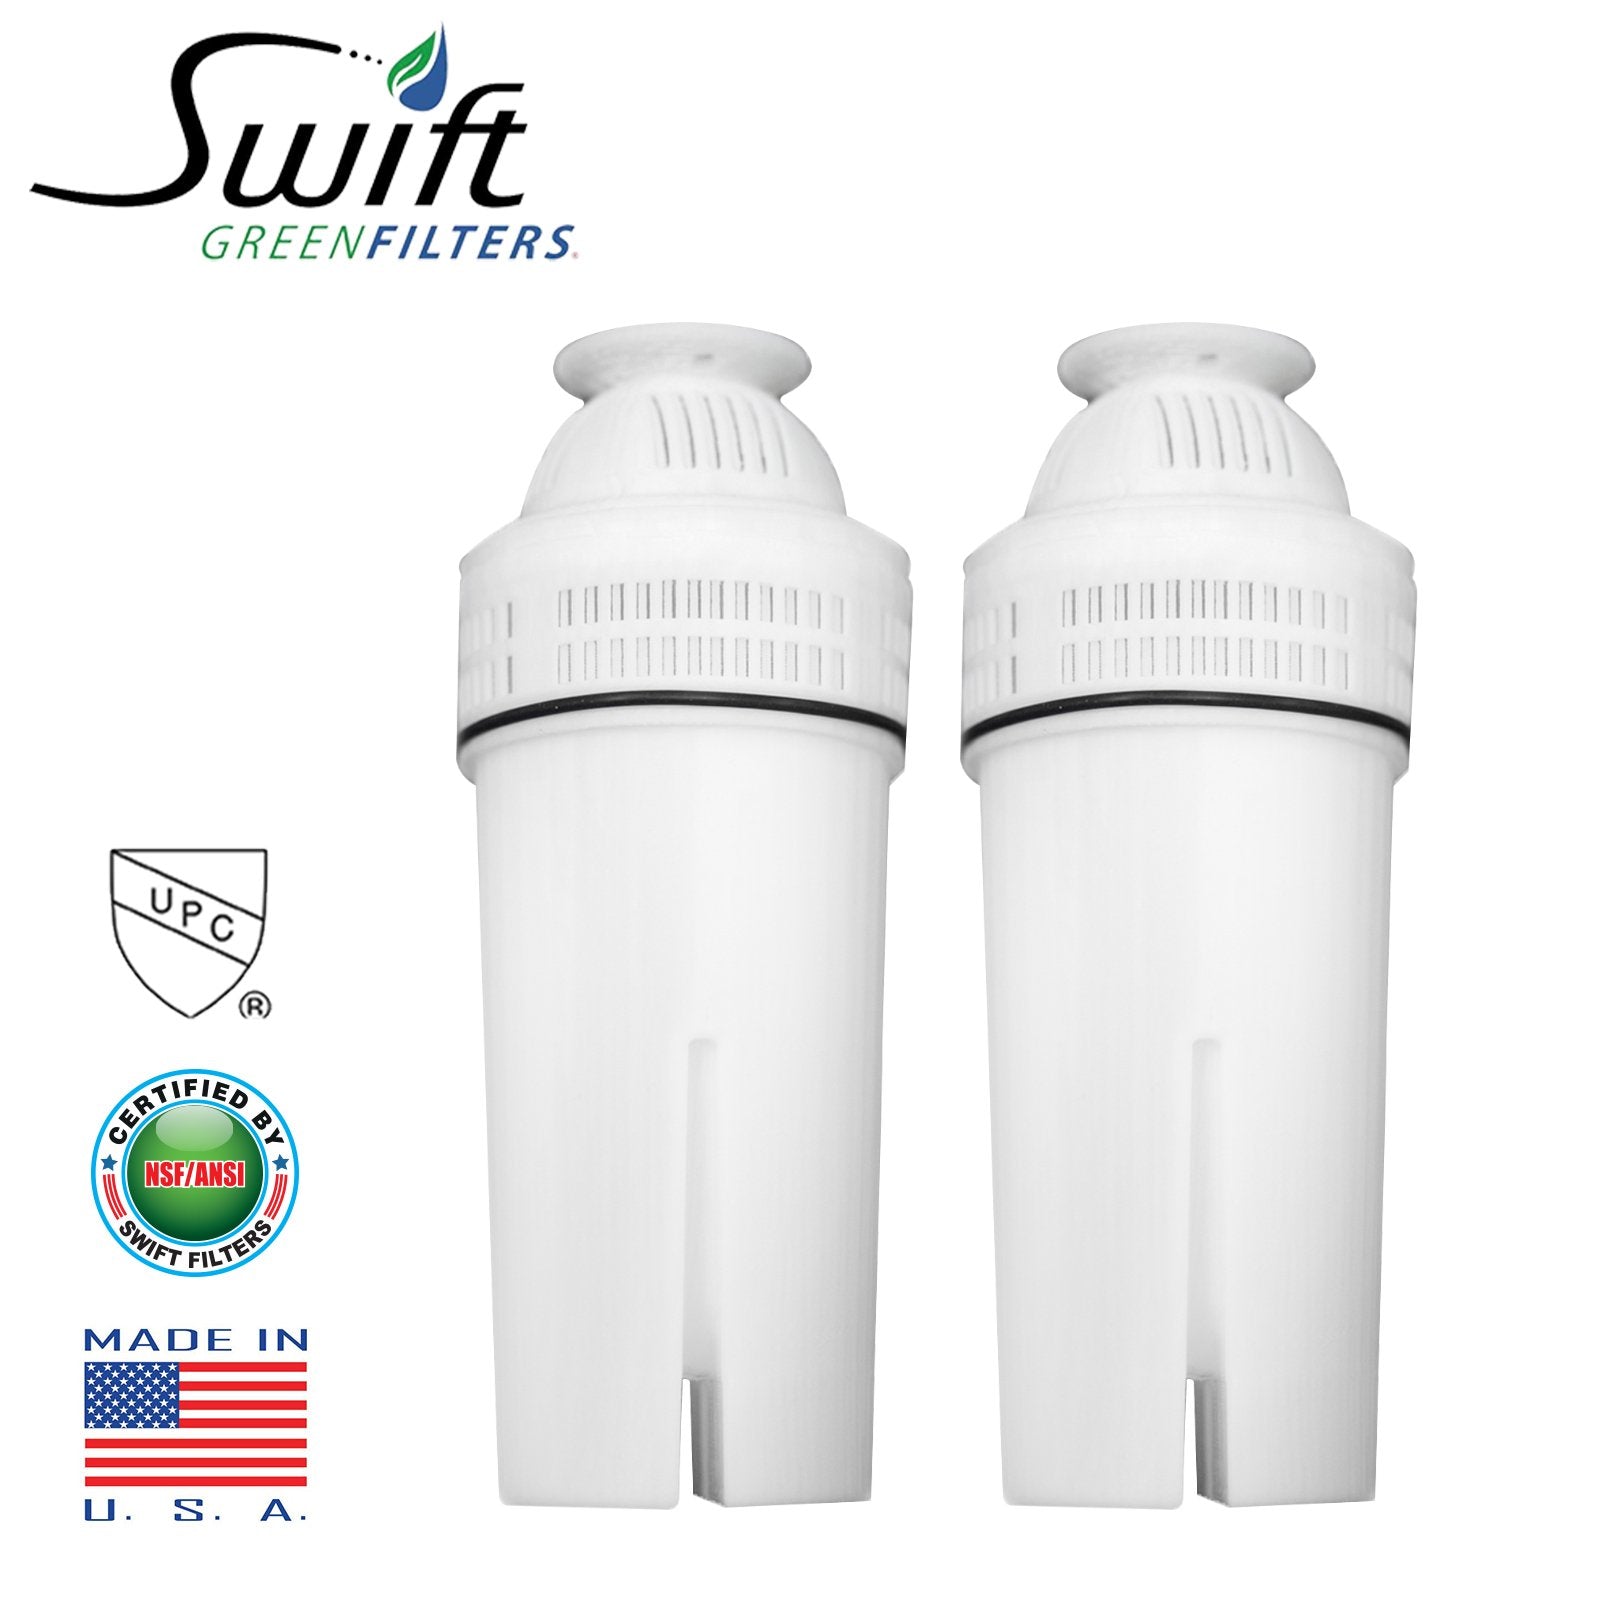 Swift Green Filters Brita Pitcher Water Filtration Replacement Filter, White SGF-B-P-CTO